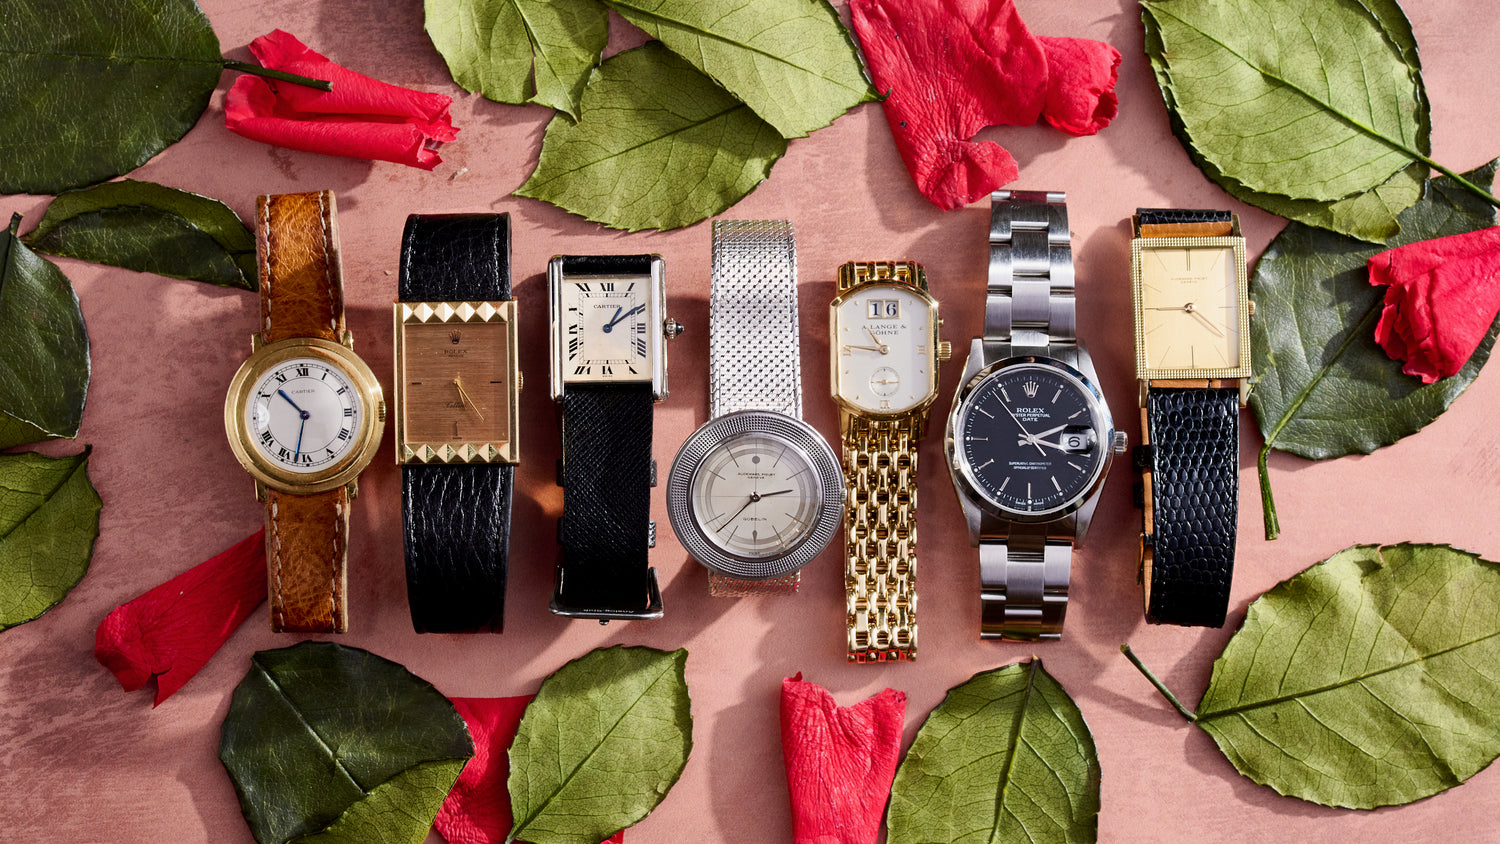 FOR THE LOVE OF TIME: MOTHER'S DAY WATCHES & WATCH-RELATED GIFT